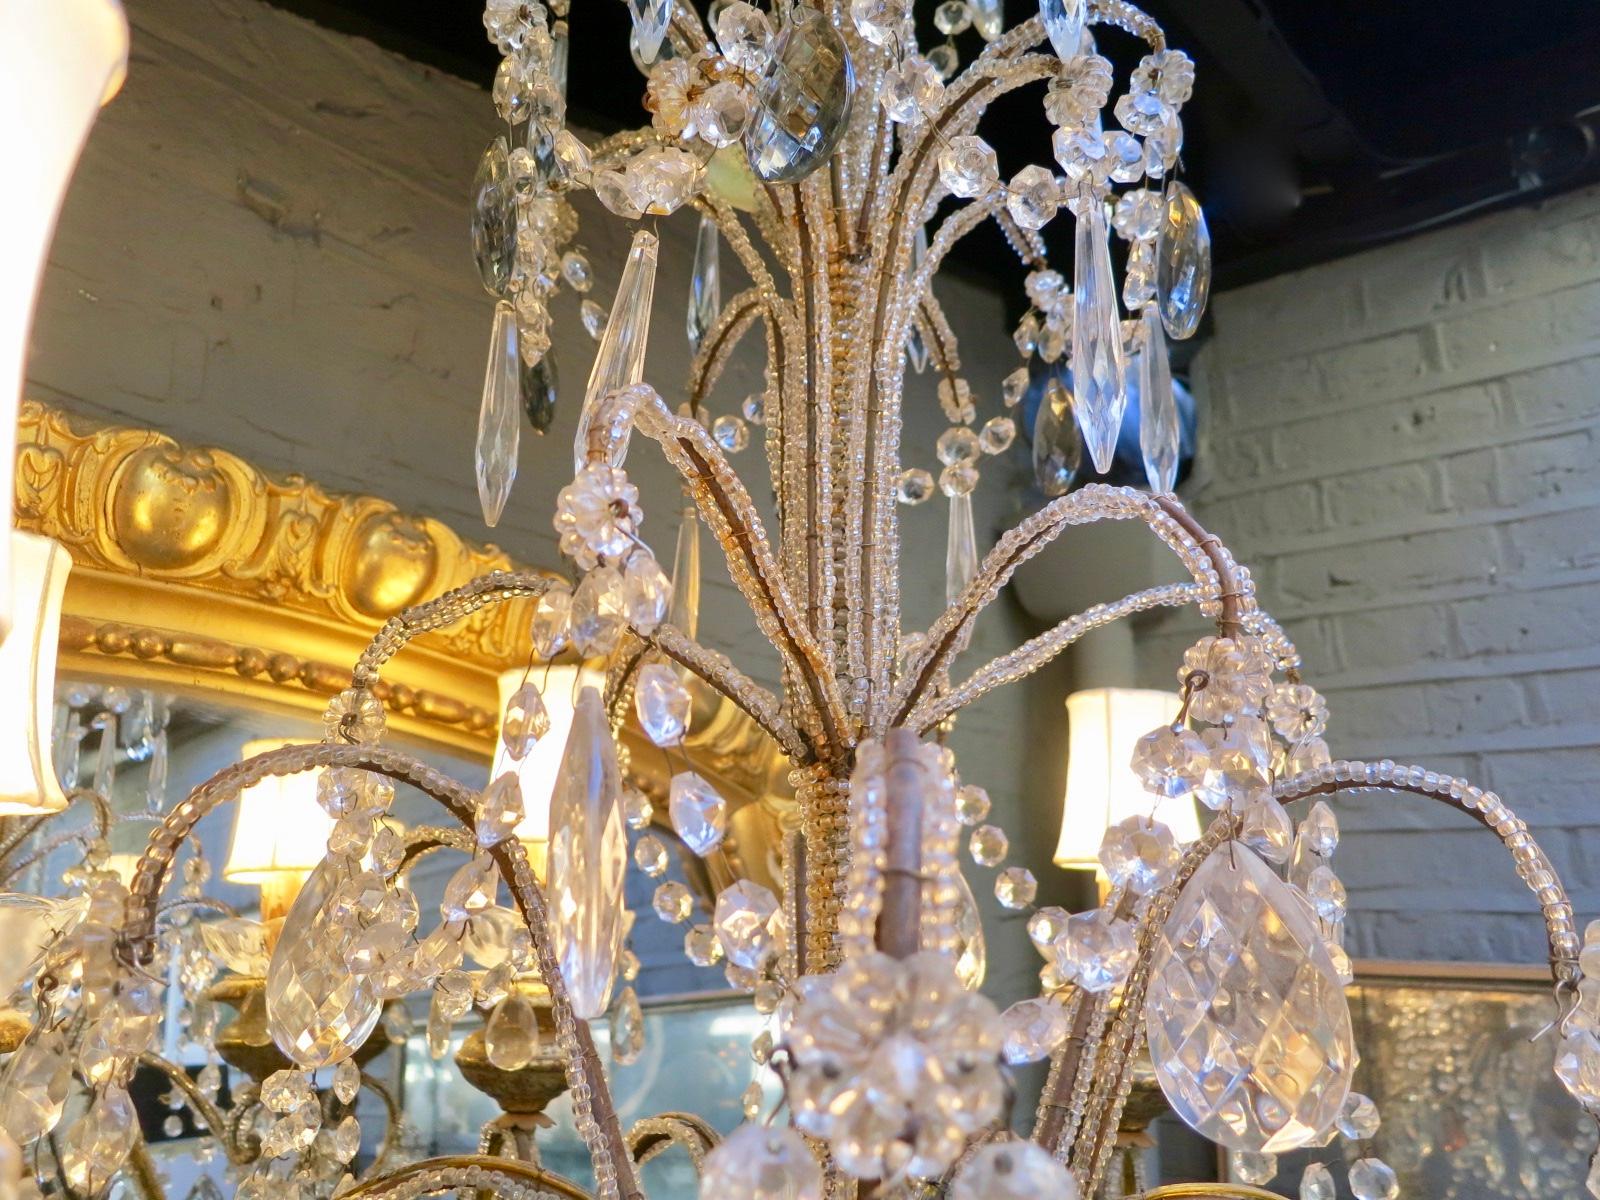 A 20th century pair of Florentine style Italian chandeliers, with six arms, gold gilt and multi coloured cut glass on beaded iron frames.